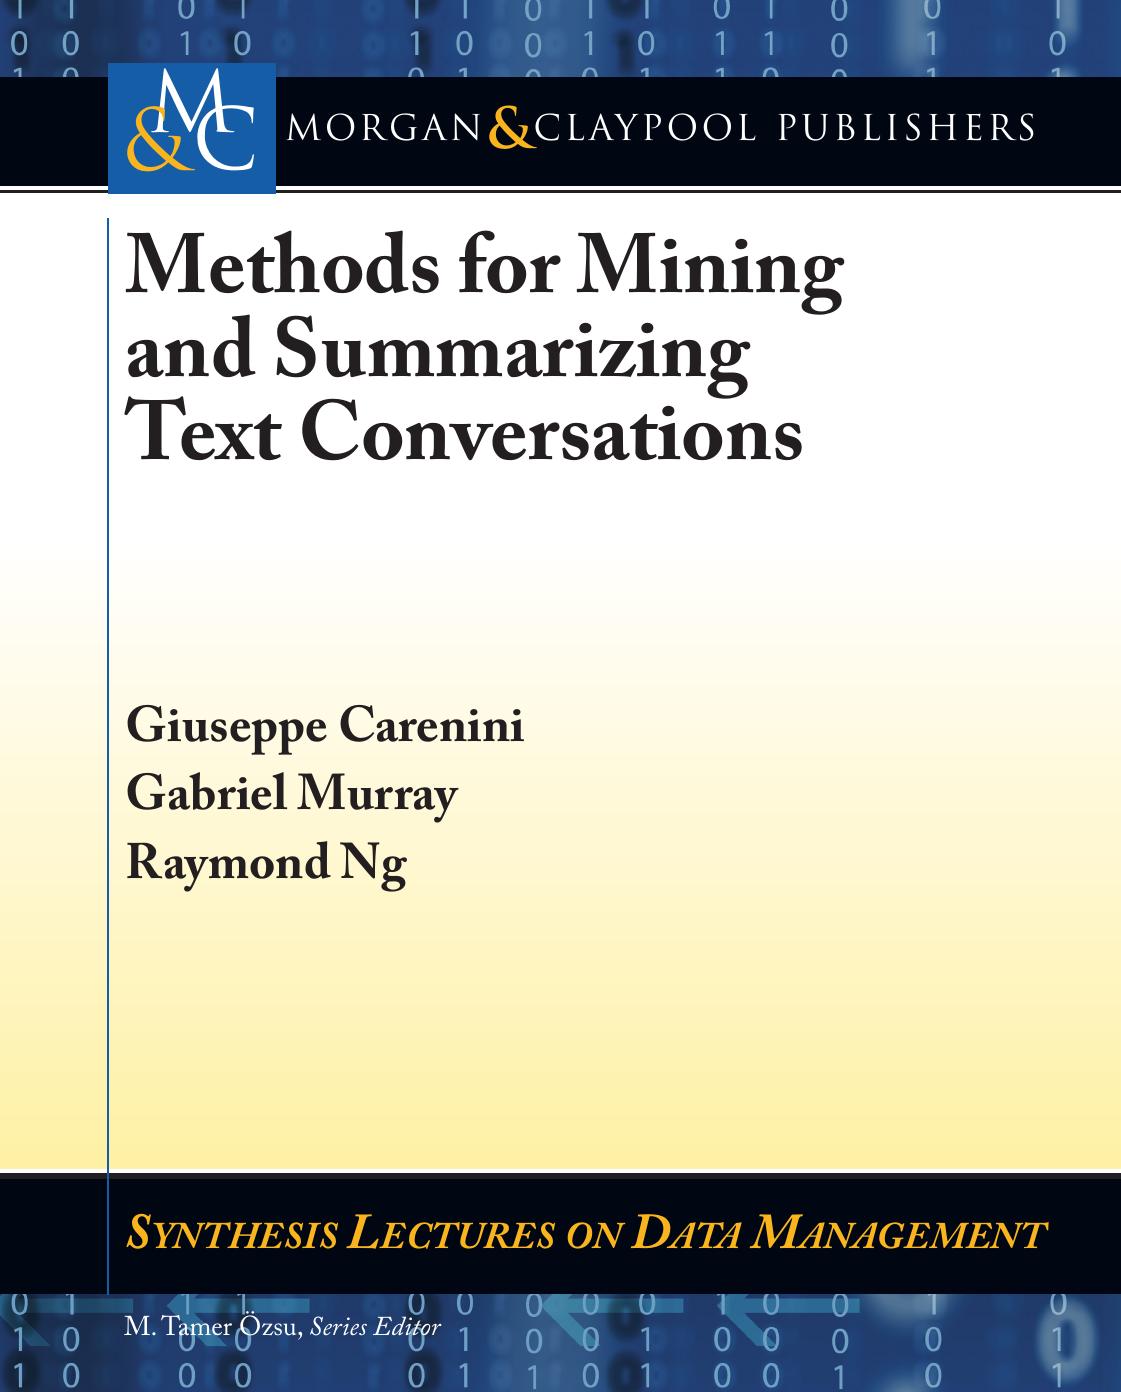 Methods for Mining and Summarizing Text Conversations